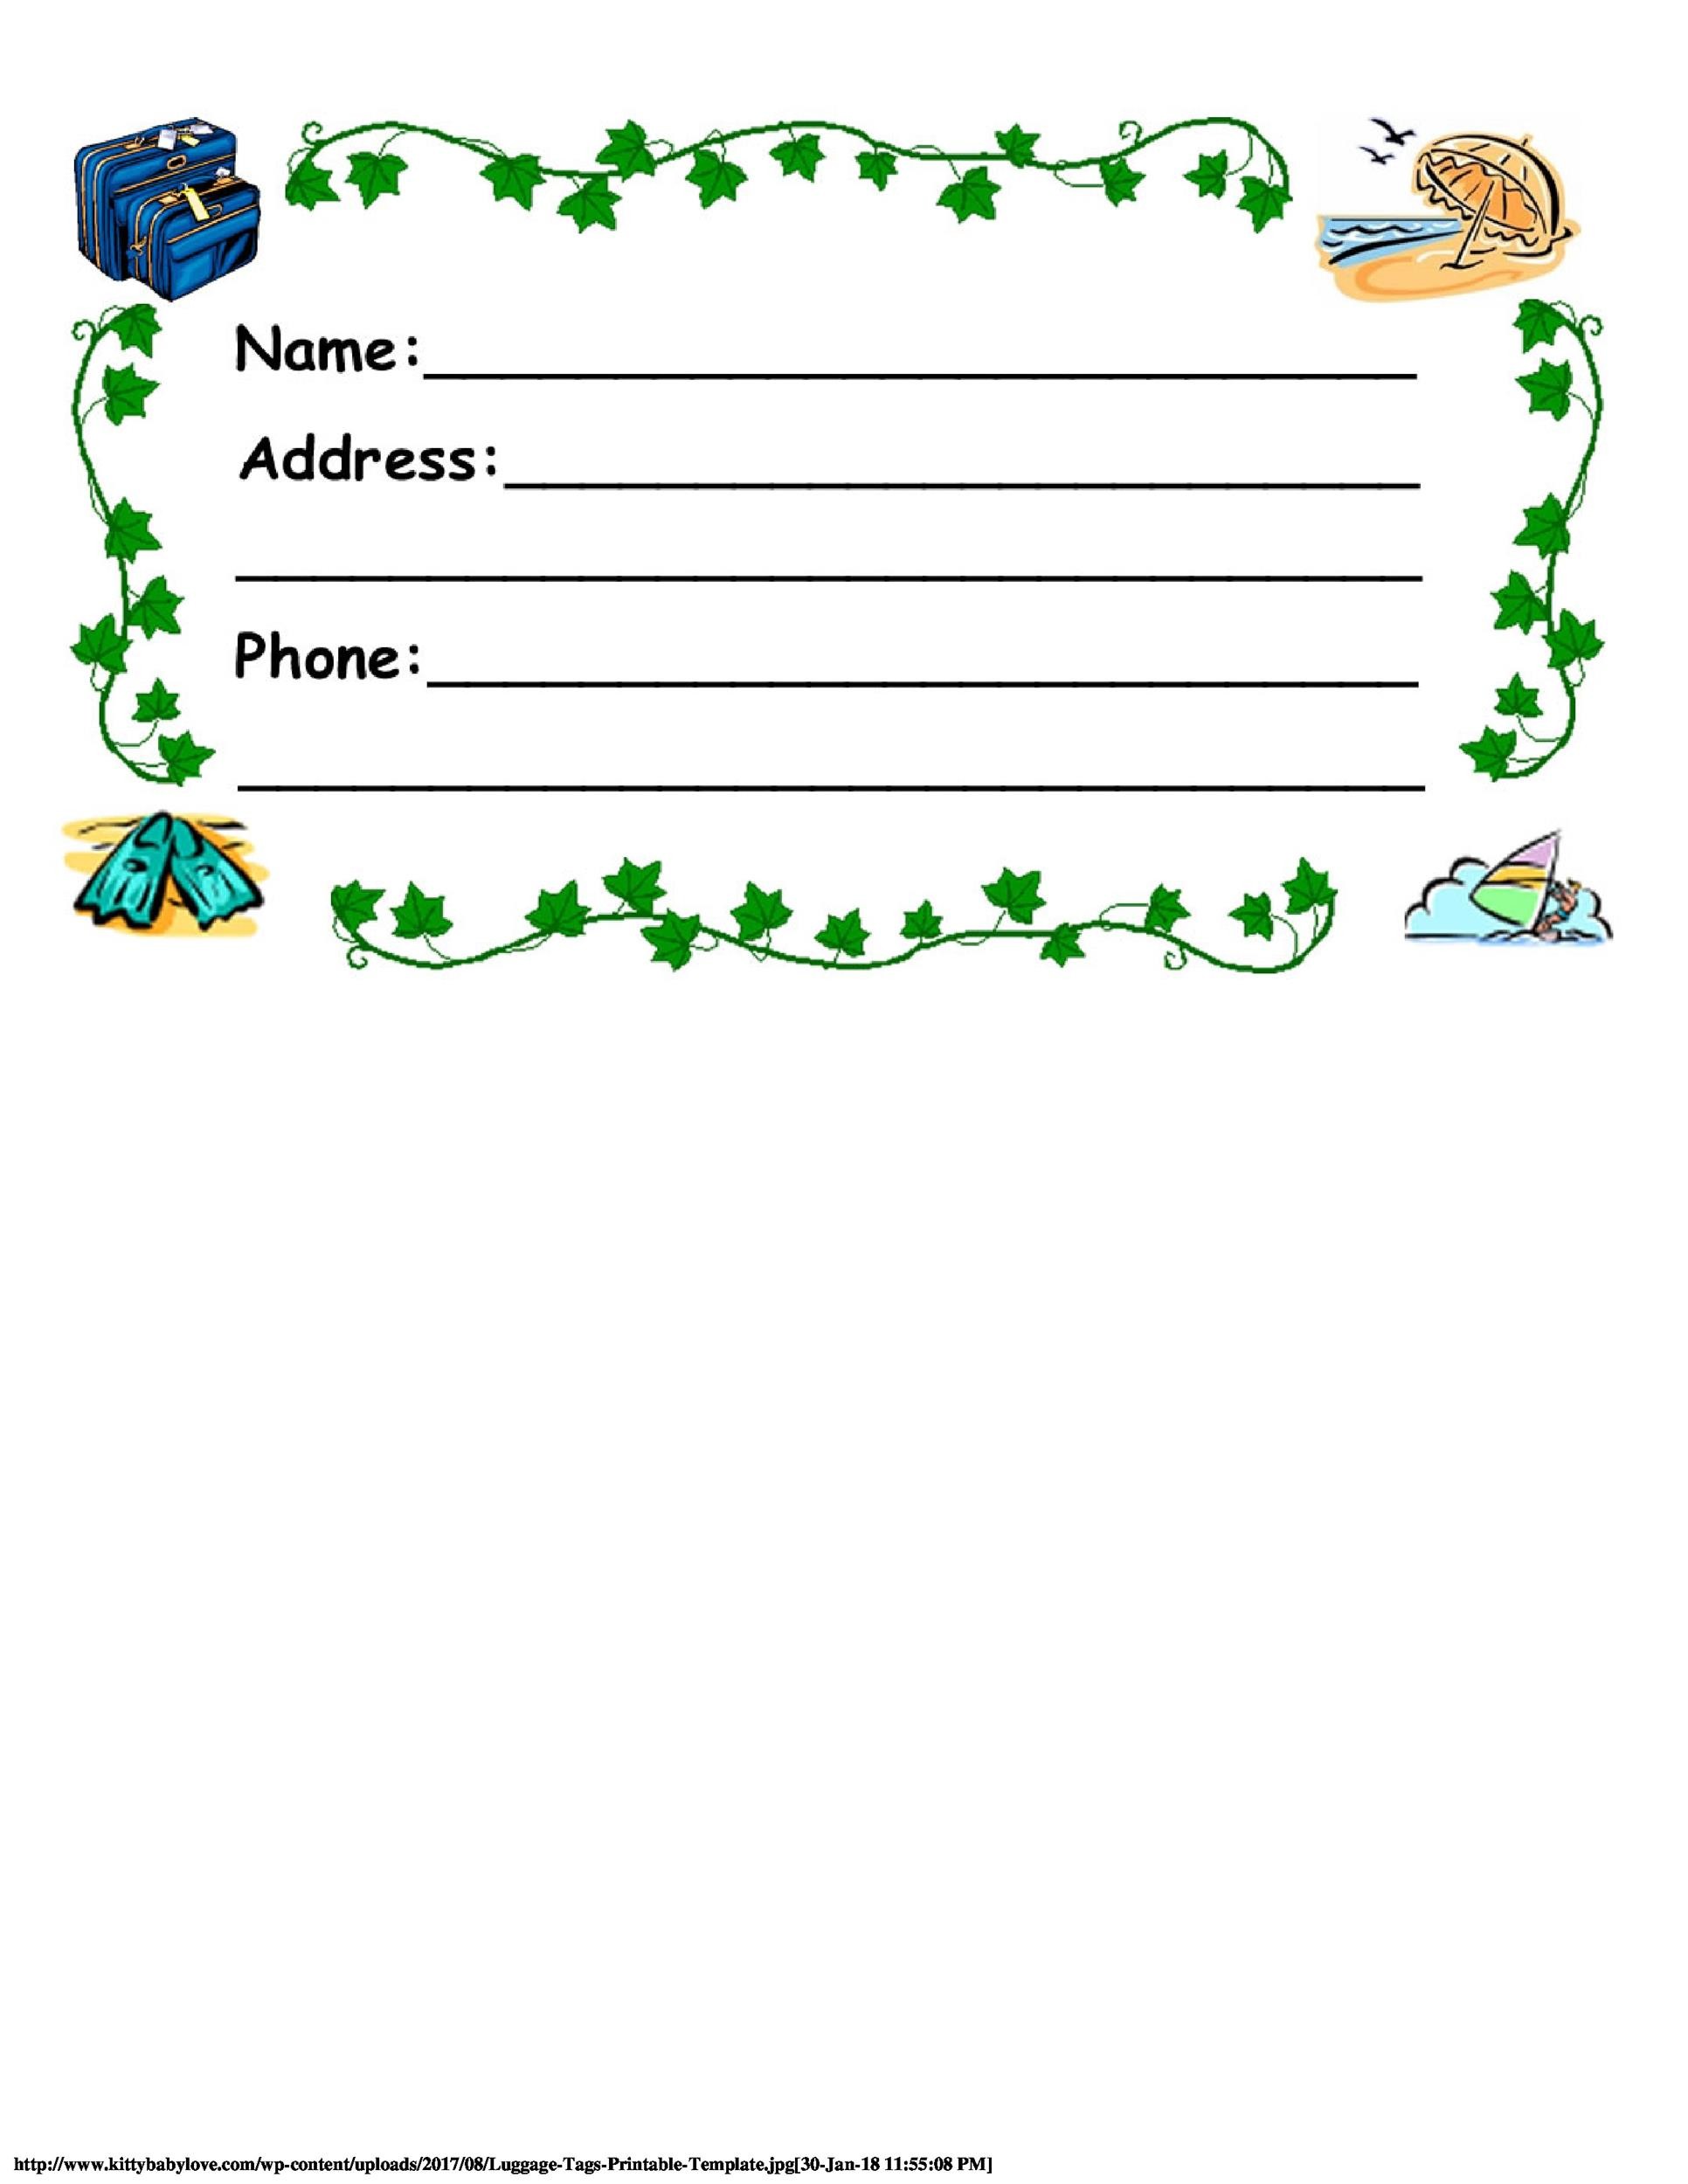 Name Tag Template For Kids